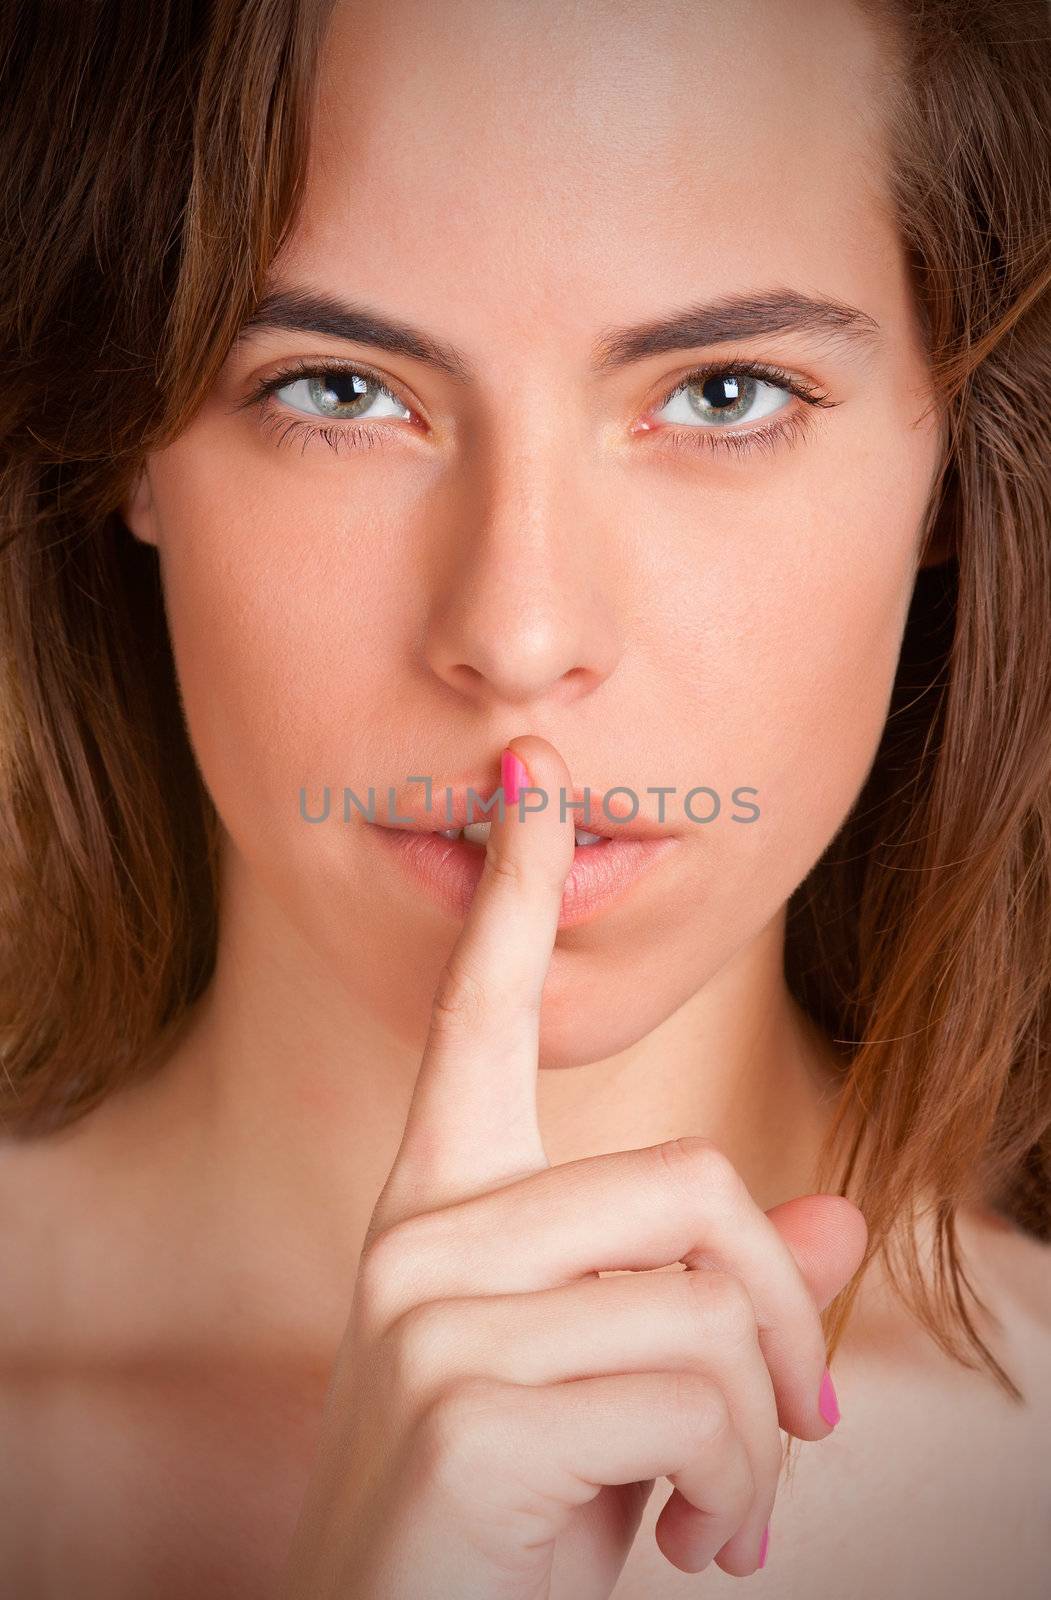 Womanl with her finger over her mouth